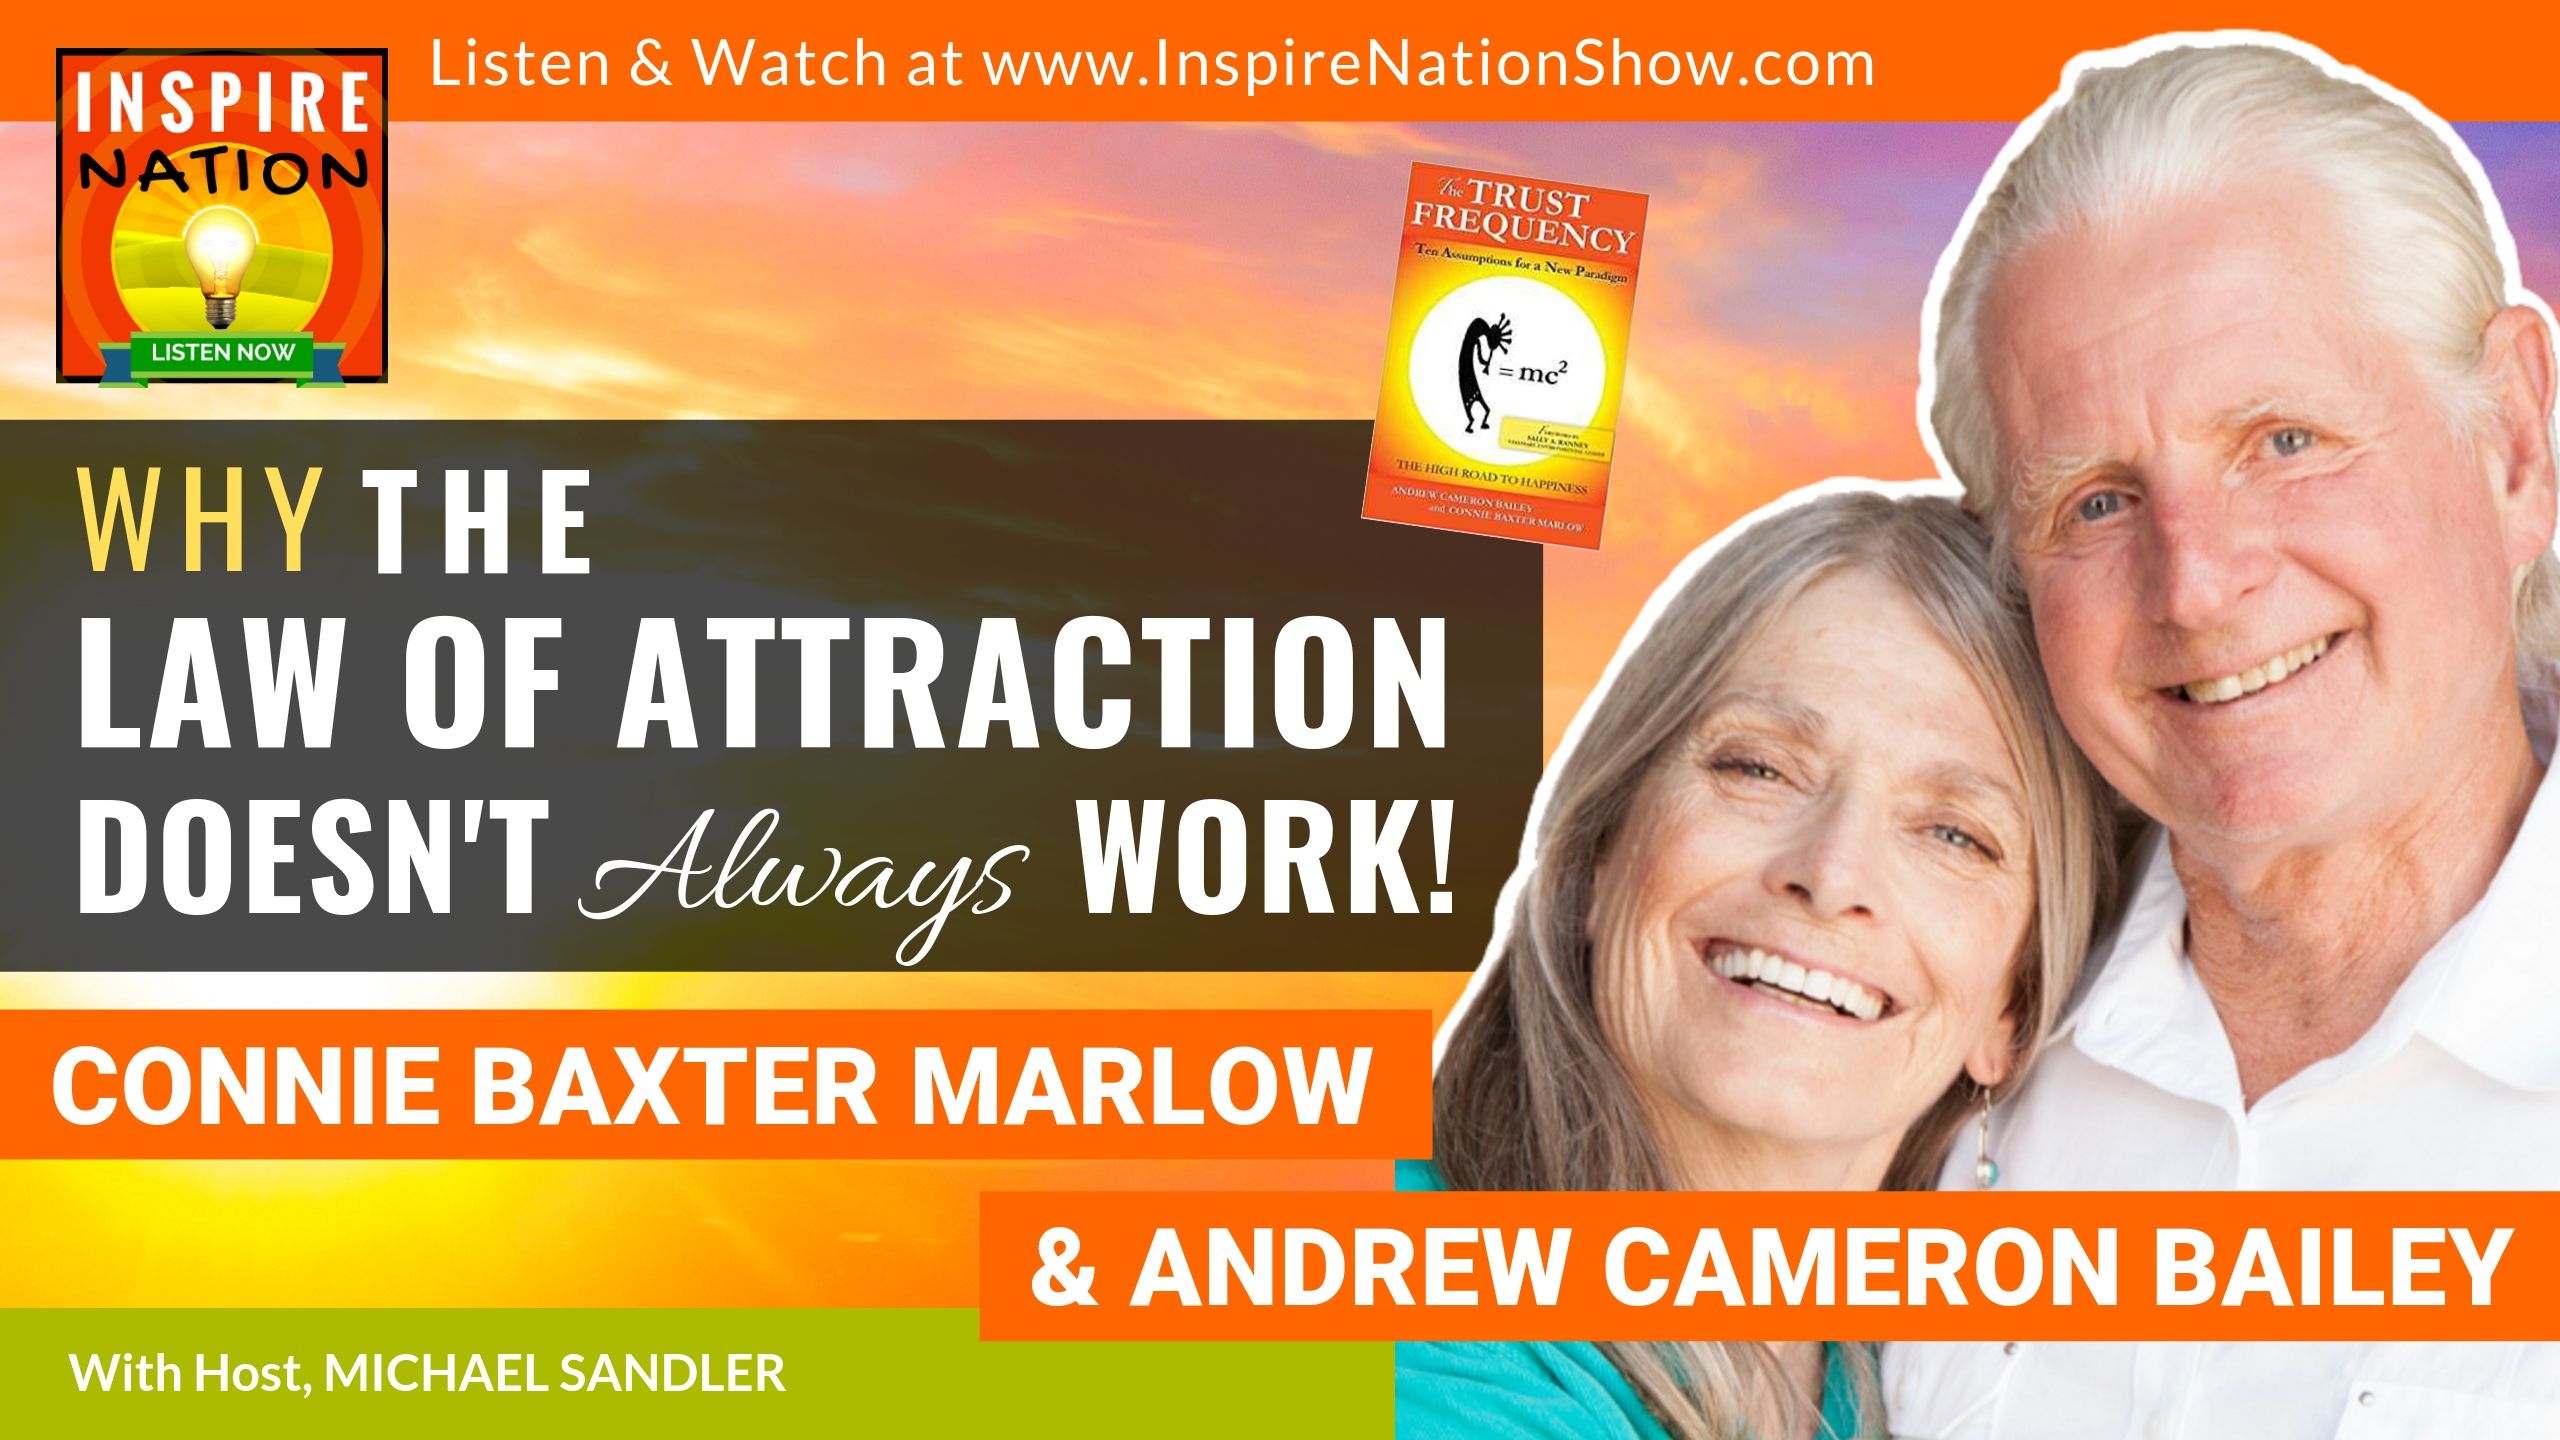 Michael Sandler interviews Andrew Cameron Bailey and Connie Baxter Marlow on the Trust Frequency and what it takes to get the Law of Attraction working for you!